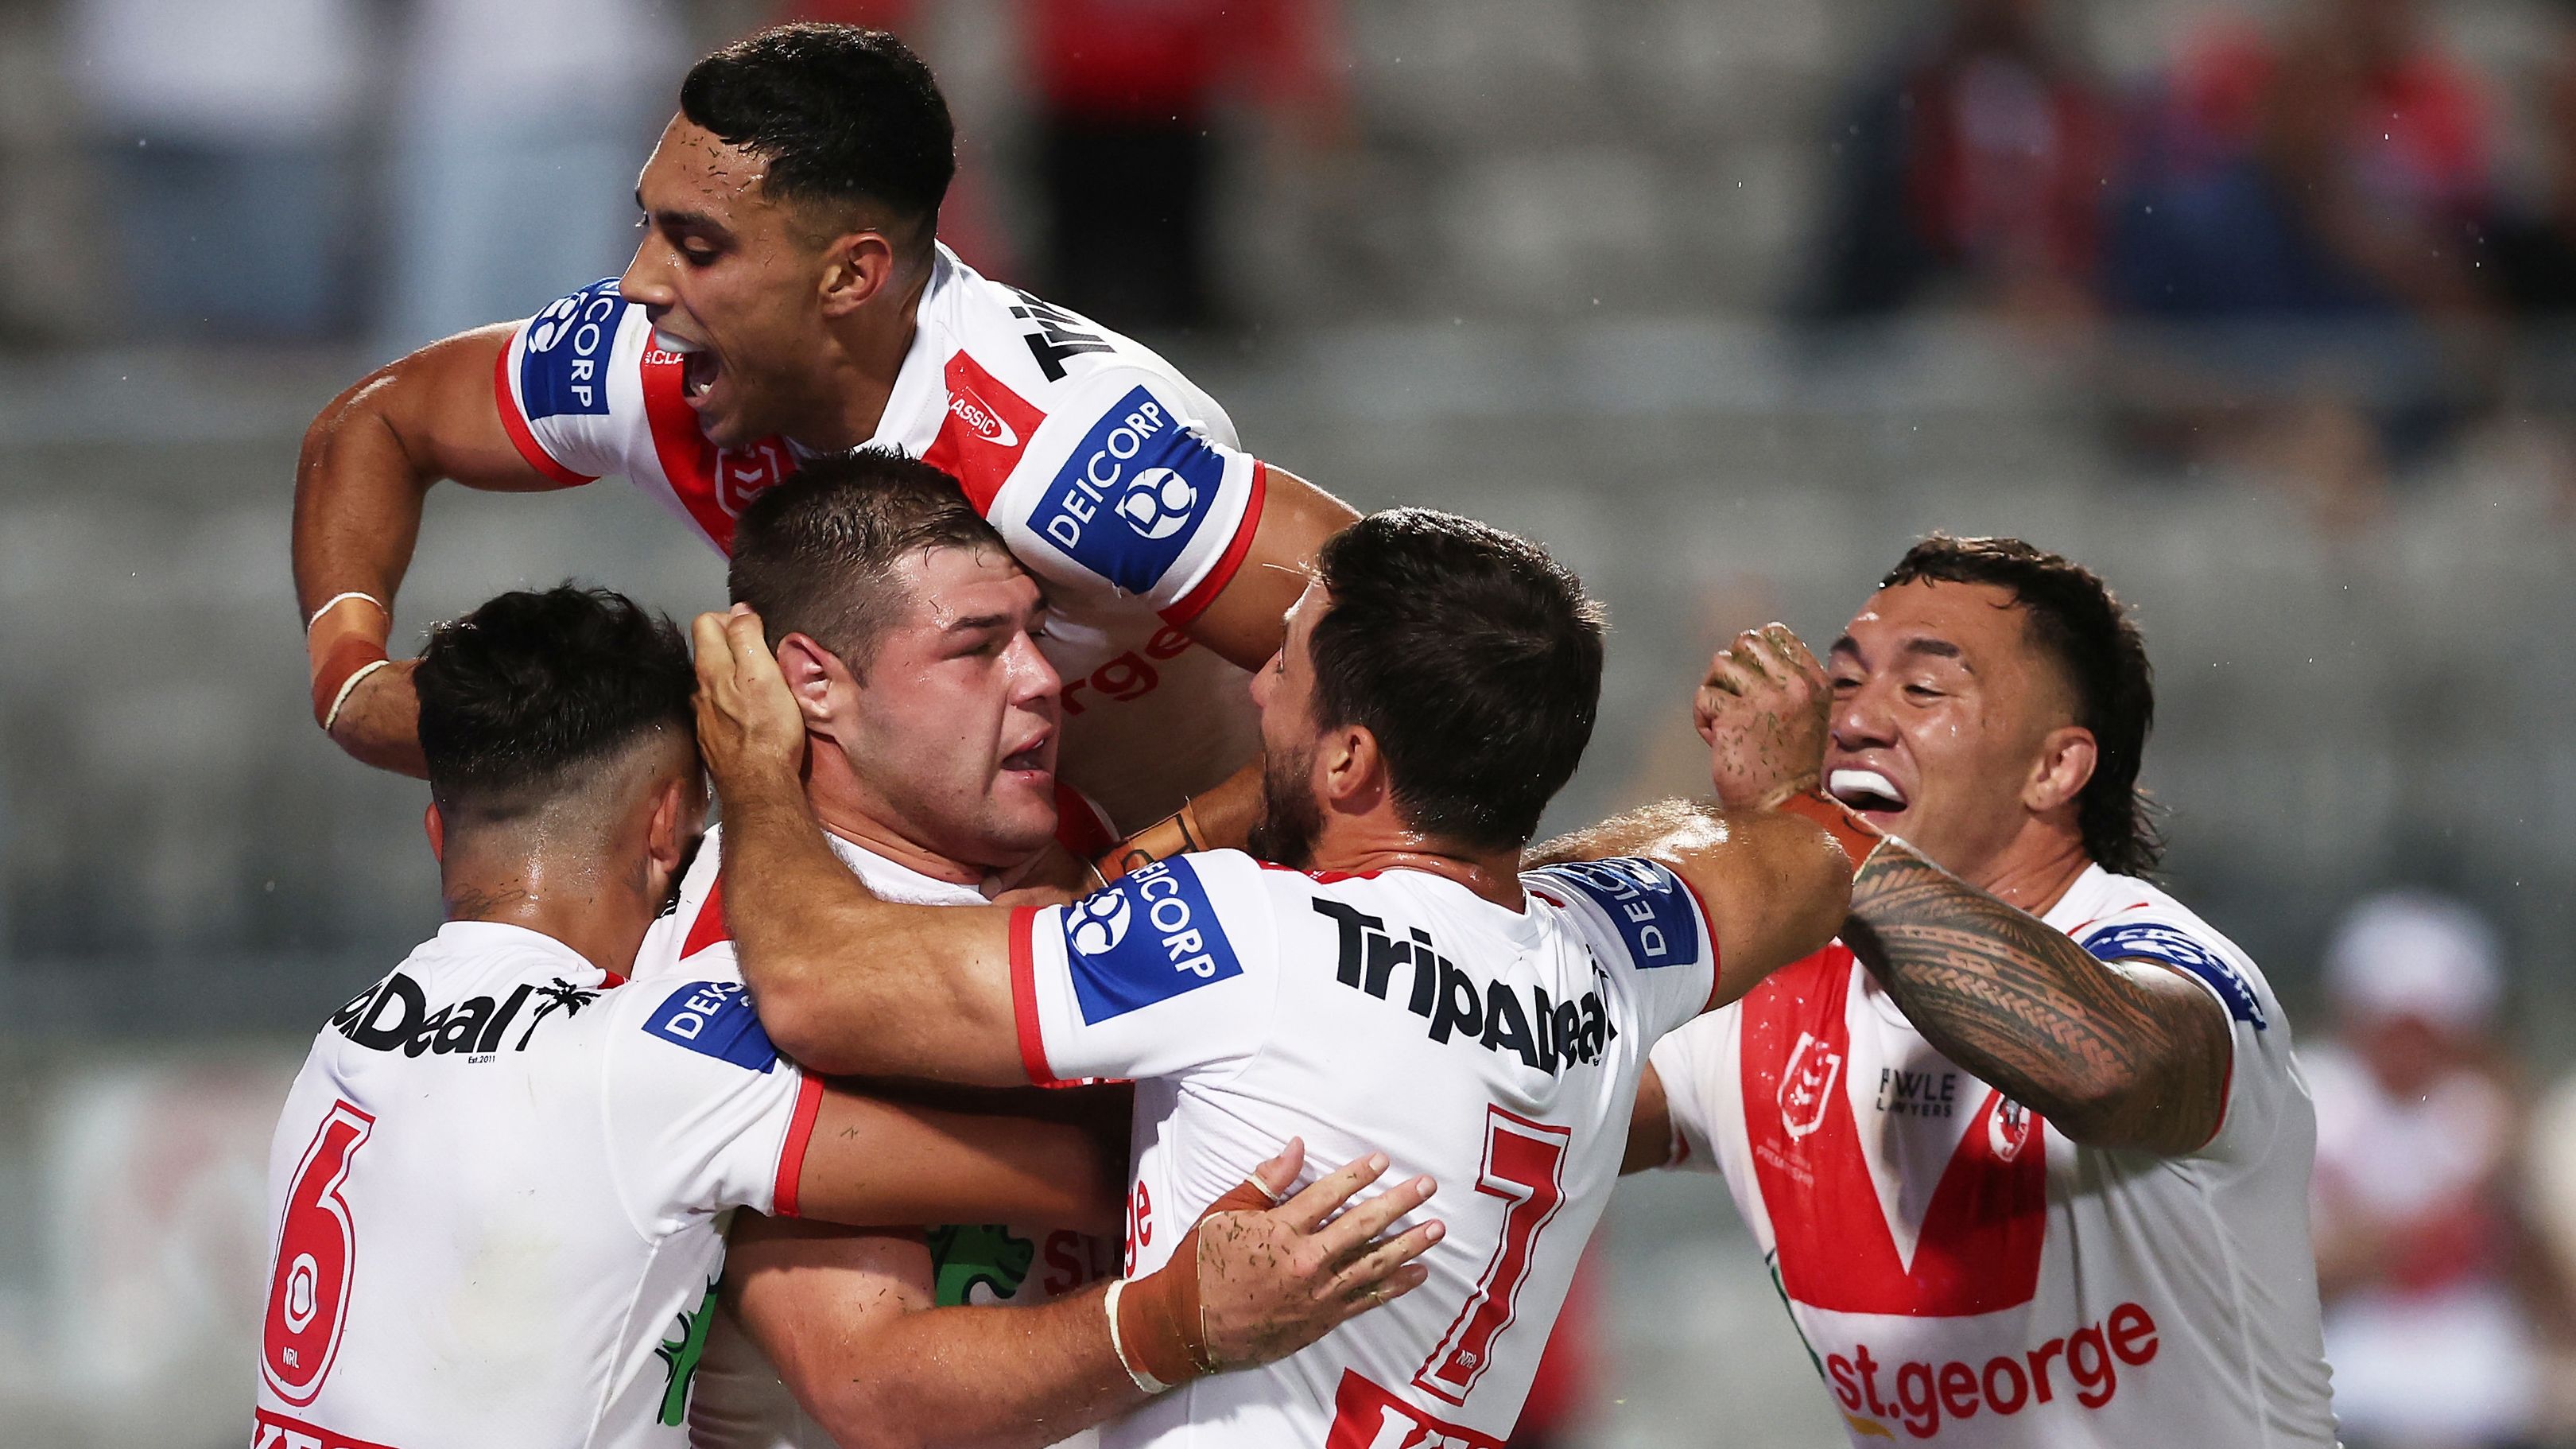 SYDNEY, AUSTRALIA - MARCH 12:  Blake Lawrie of the Dragons celebrates with team mates after scoring a try during the round two NRL match between the St George Illawarra Dragons and the Gold Coast Titans at Netstrata Jubilee Stadium on March 12, 2023 in Sydney, Australia. (Photo by Matt King/Getty Images)